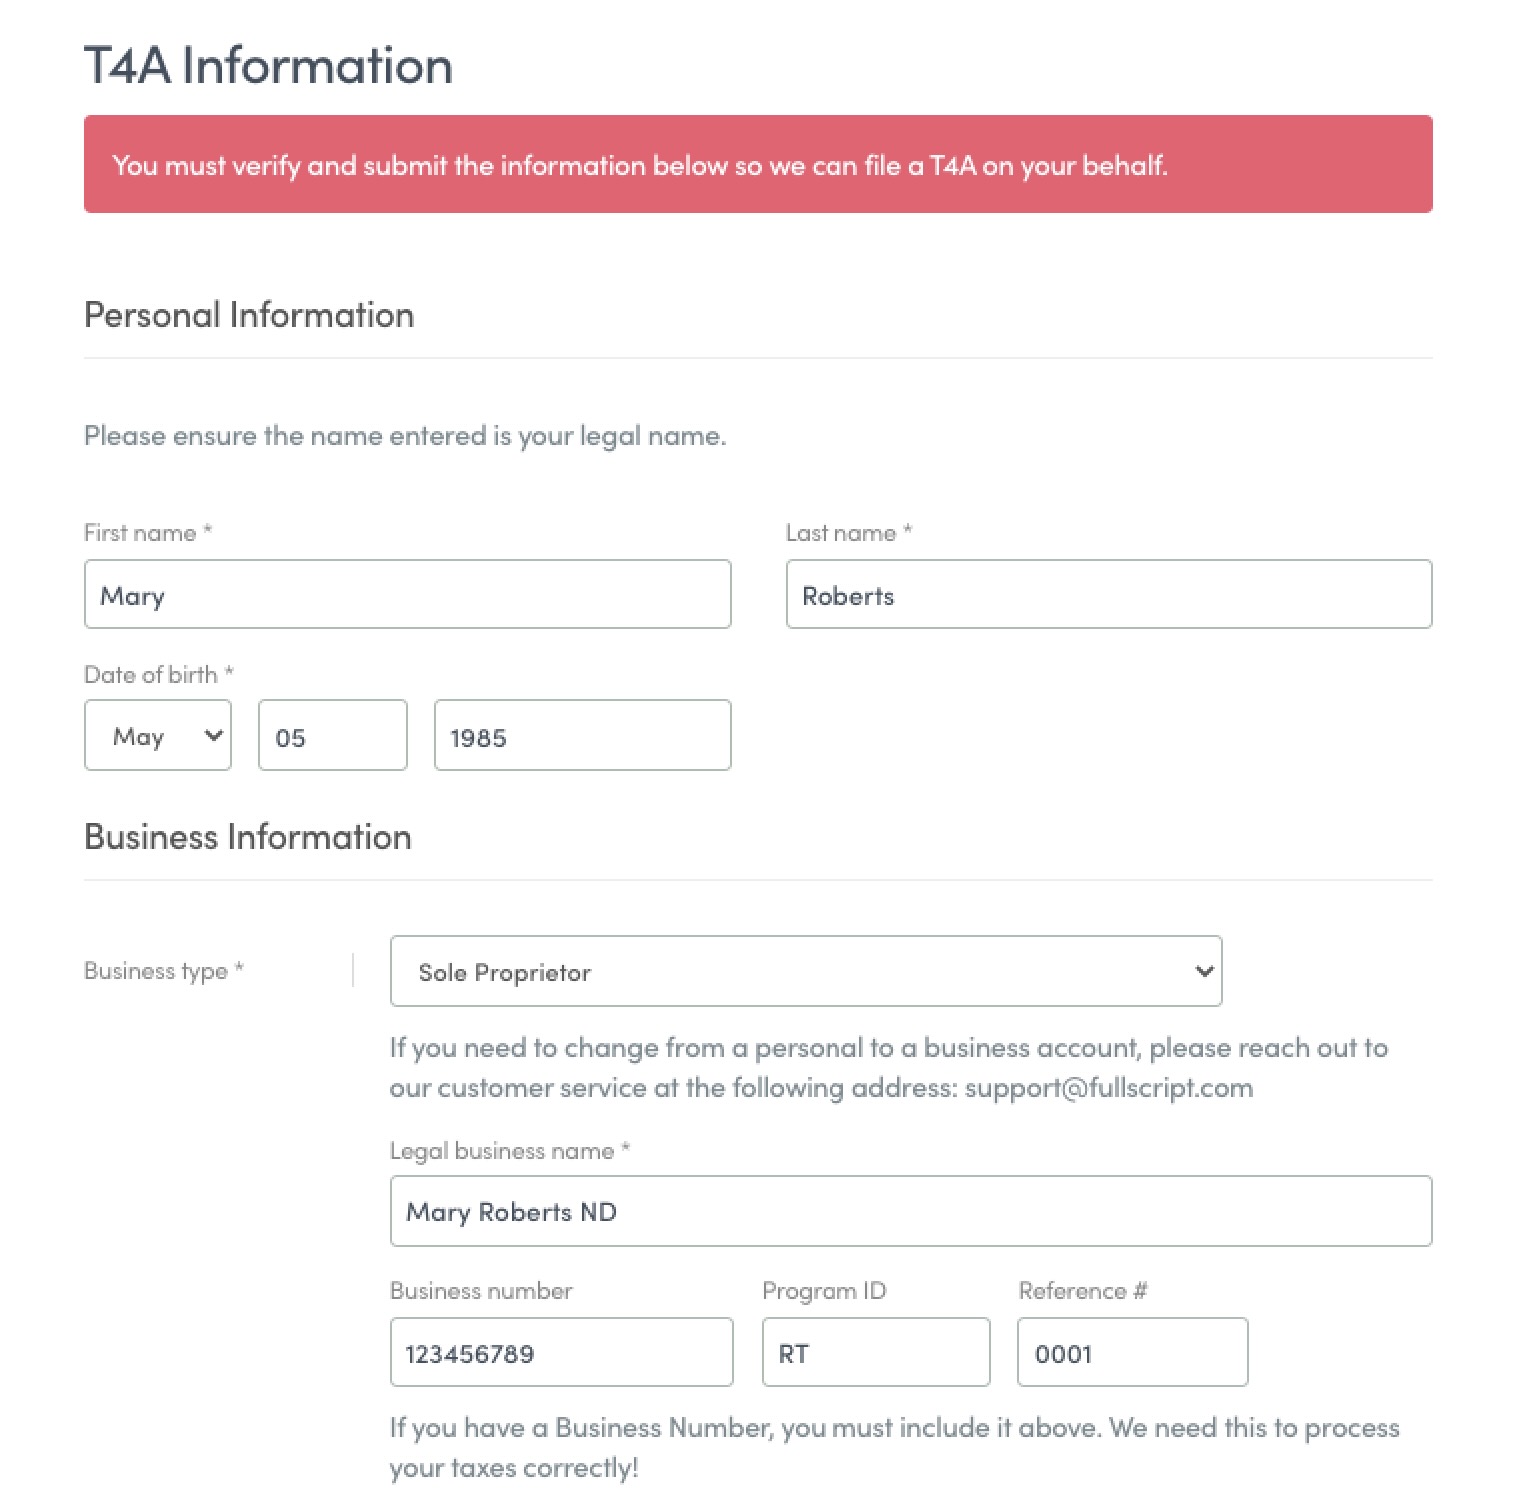 The T4A information page